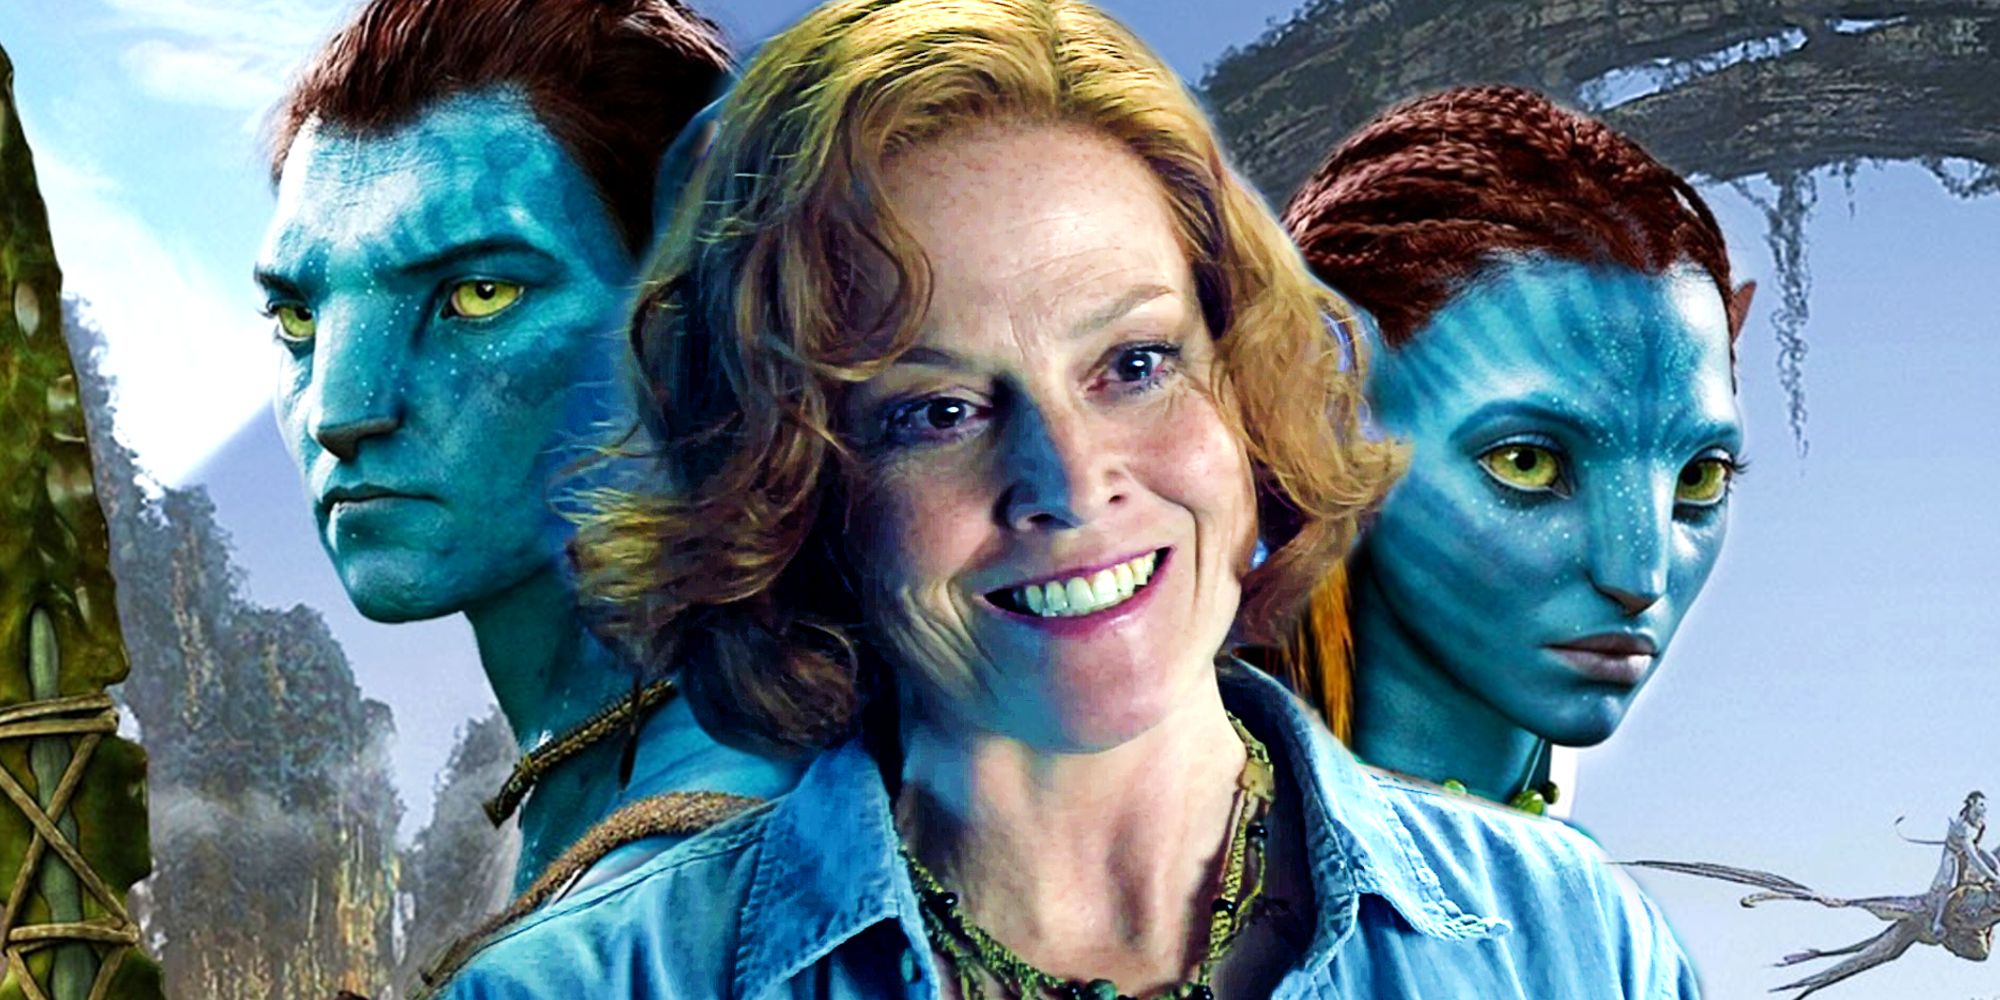 Sigourney Weaver in Avatar 2 with Jake Sully and Neytiri